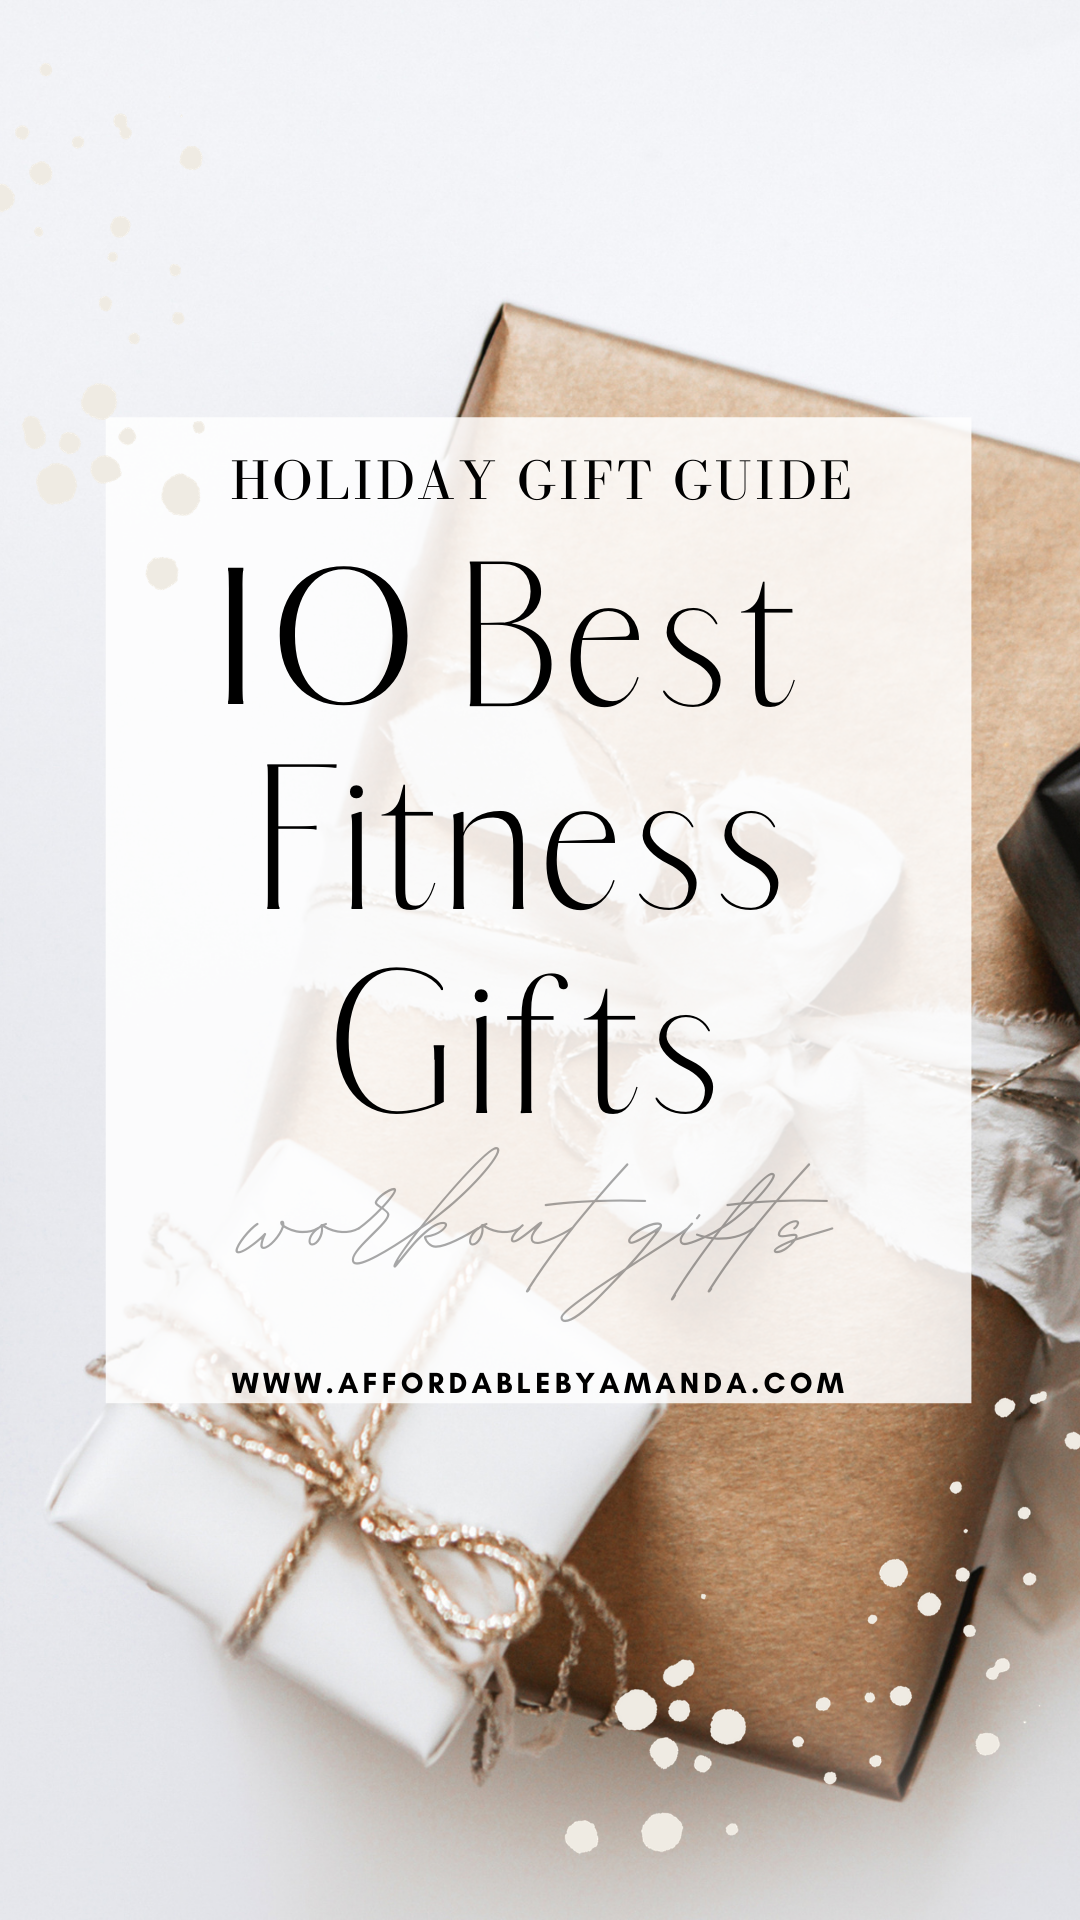 10 Best Fitness Gifts 2020 - Christmas Gifts for Workout Lovers - Affordable by Amanda